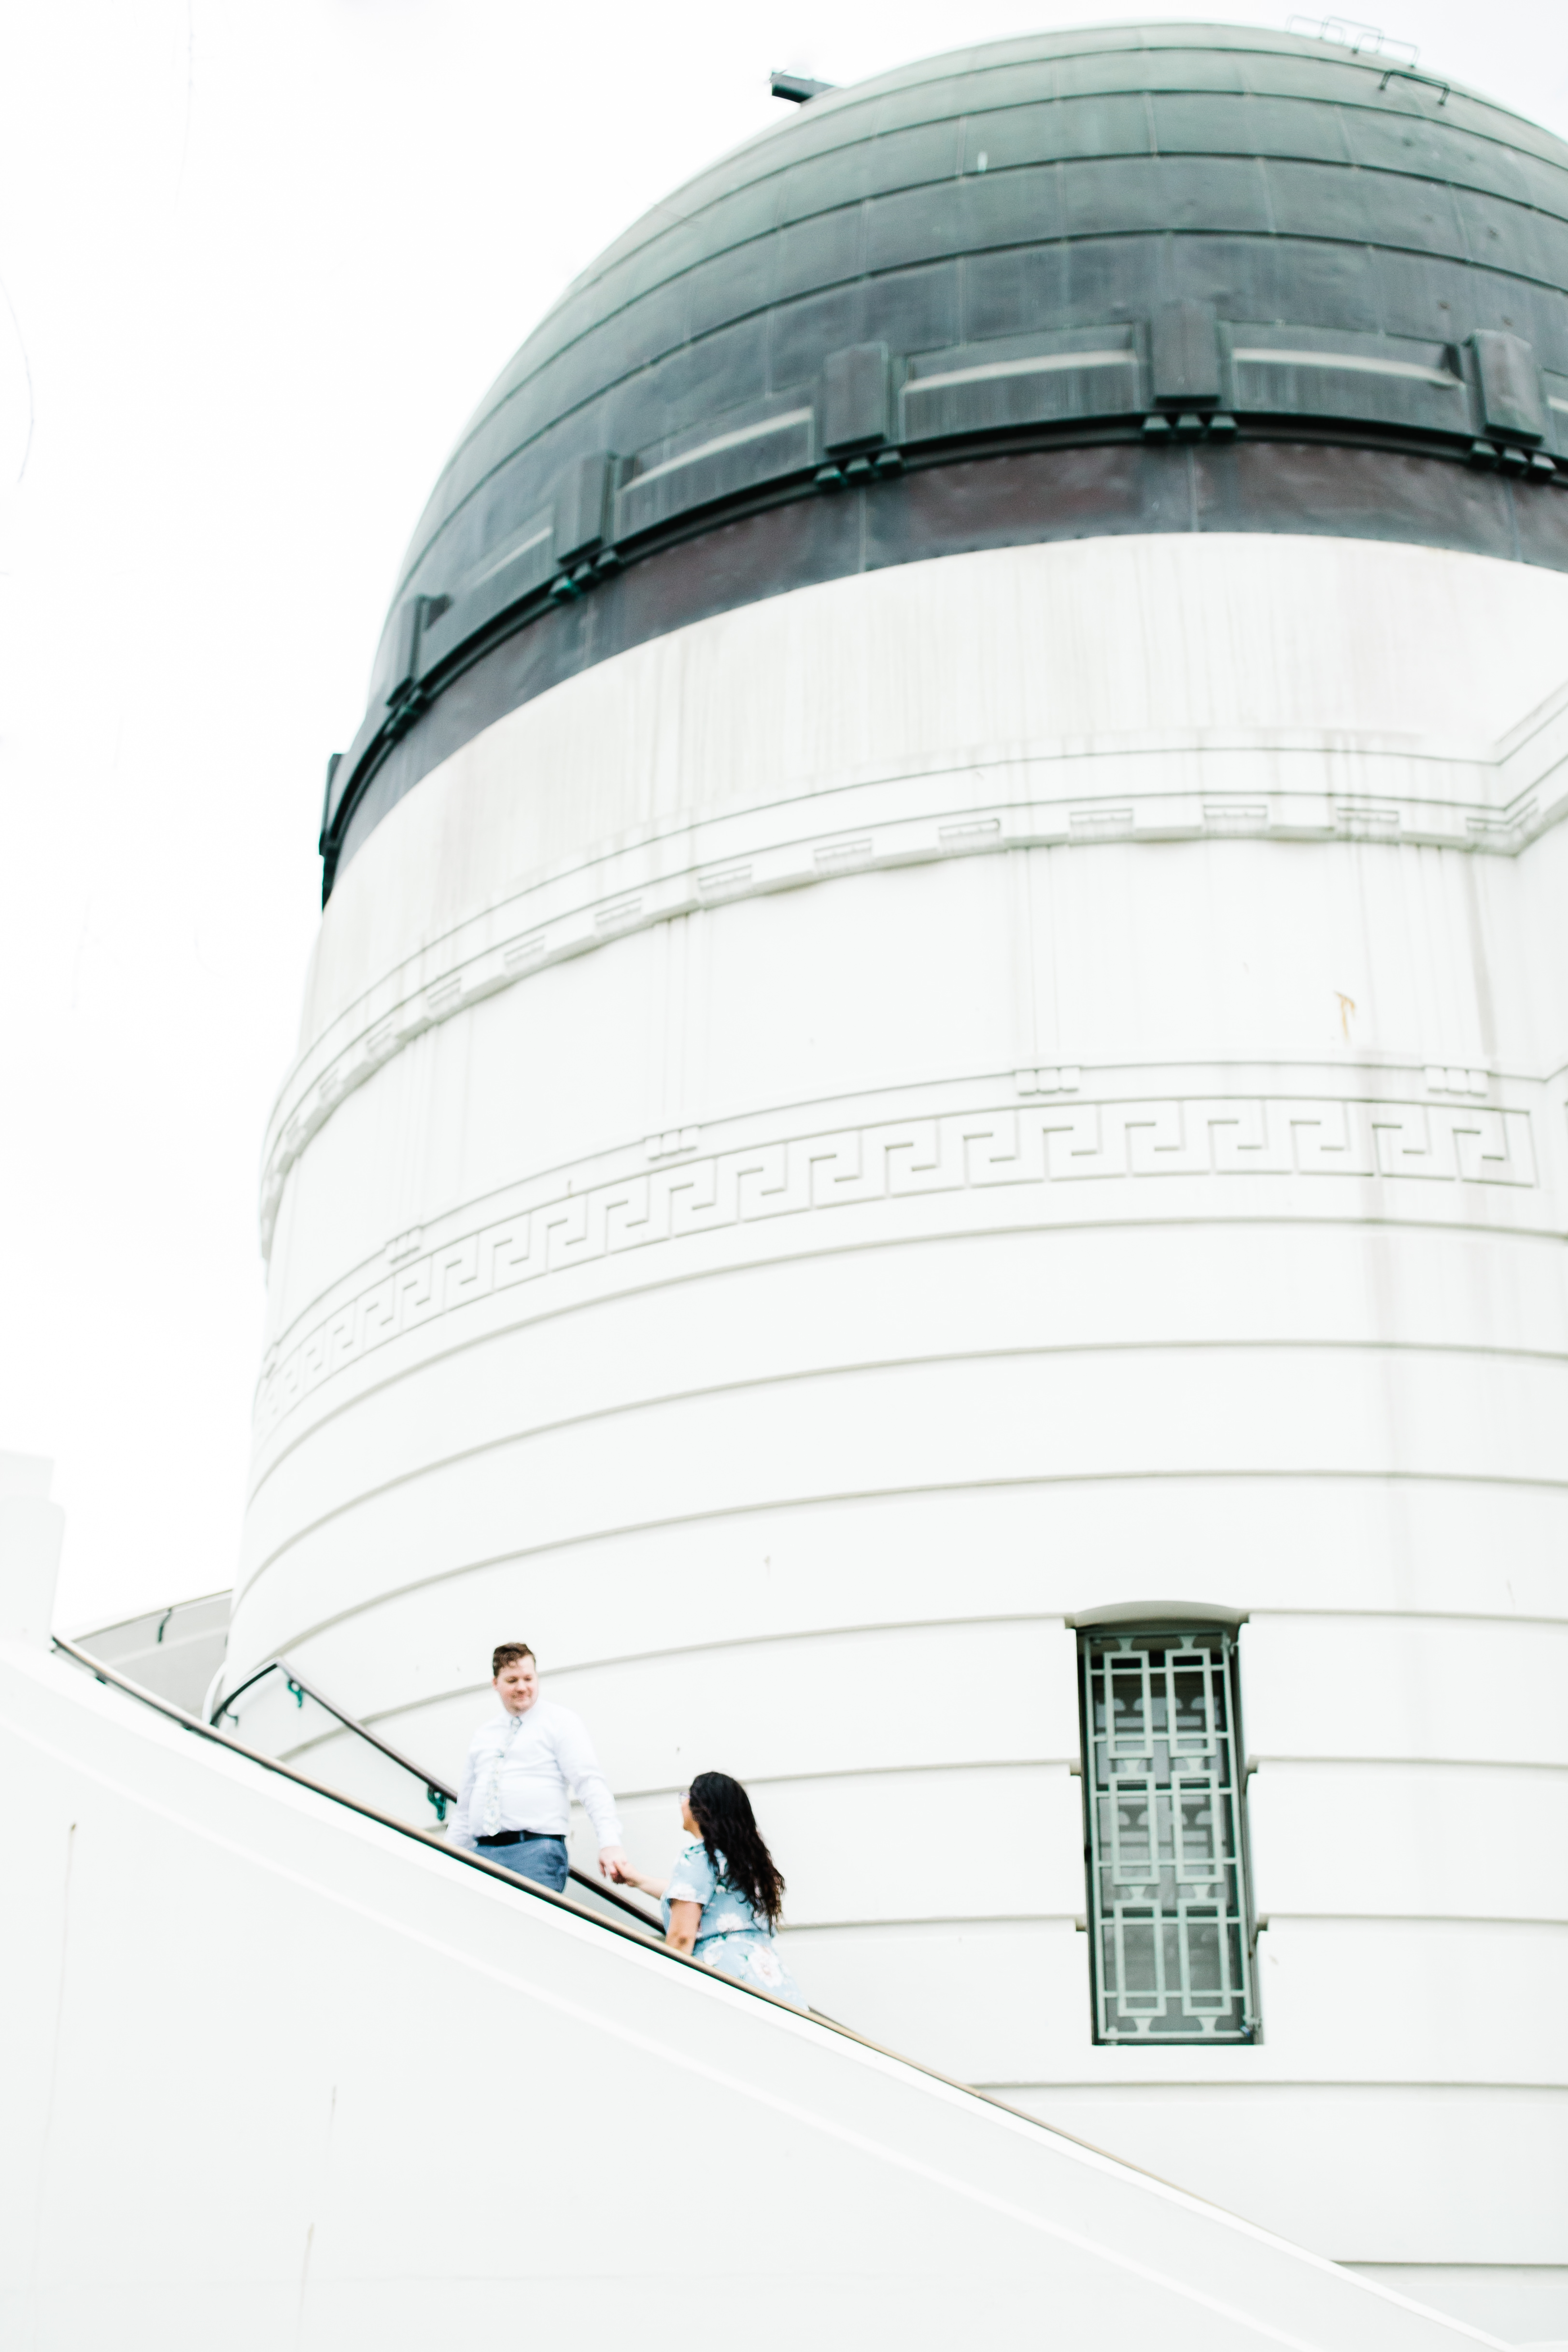 griffith observatory engagement photos Couple walking toward up stairs at Griffith Observatory in Los Angeles , California with observatory dome in the background.